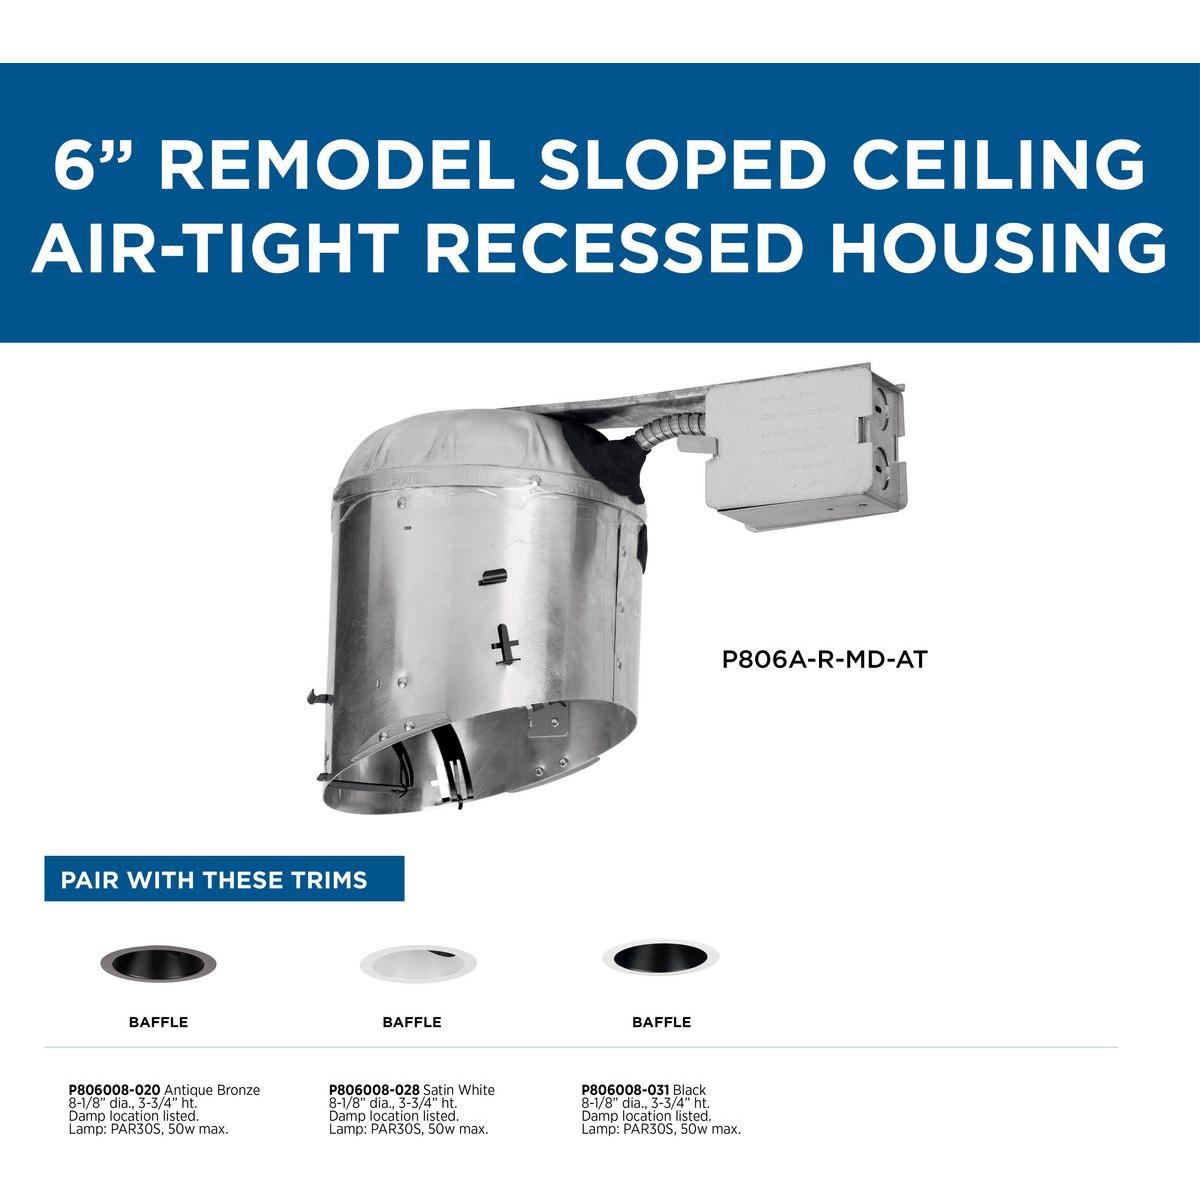 6" Recessed Slope Remodel Air-Tight Housing